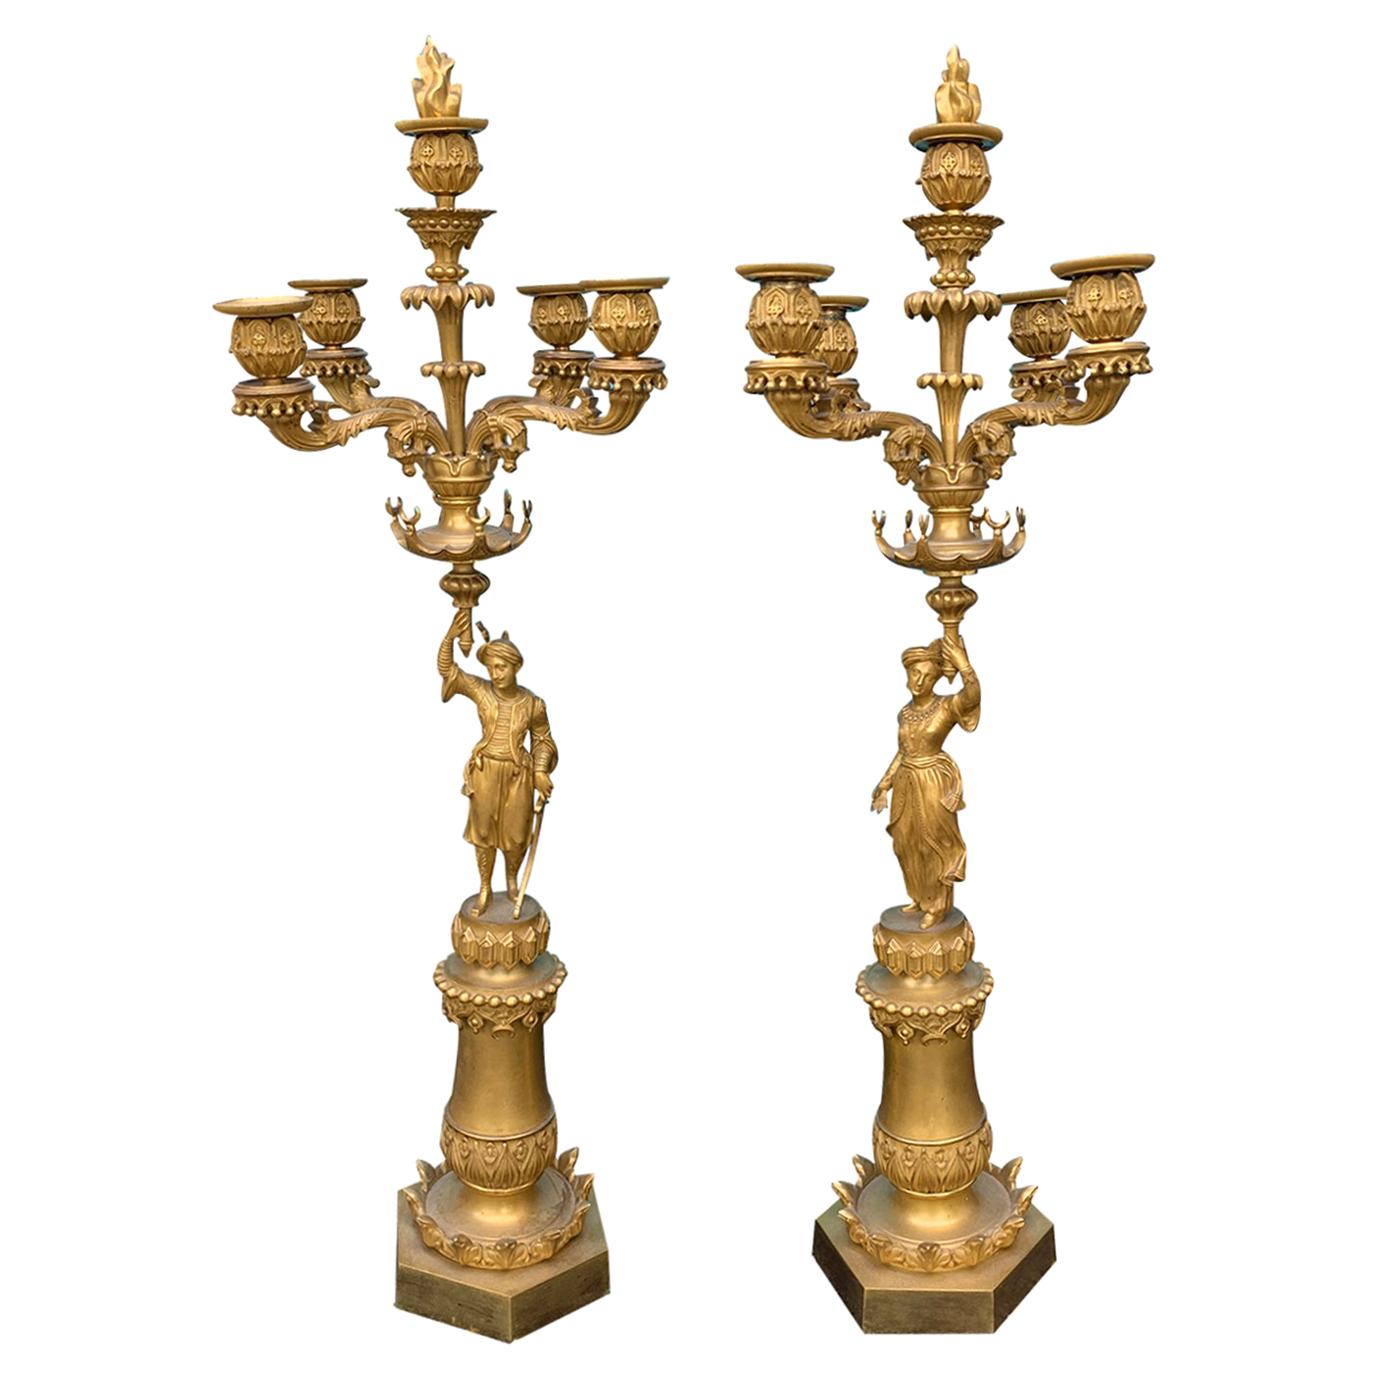 Pair of 19th Century Regency Style Gilt Bronze Four Arm Figural Candelabras For Sale